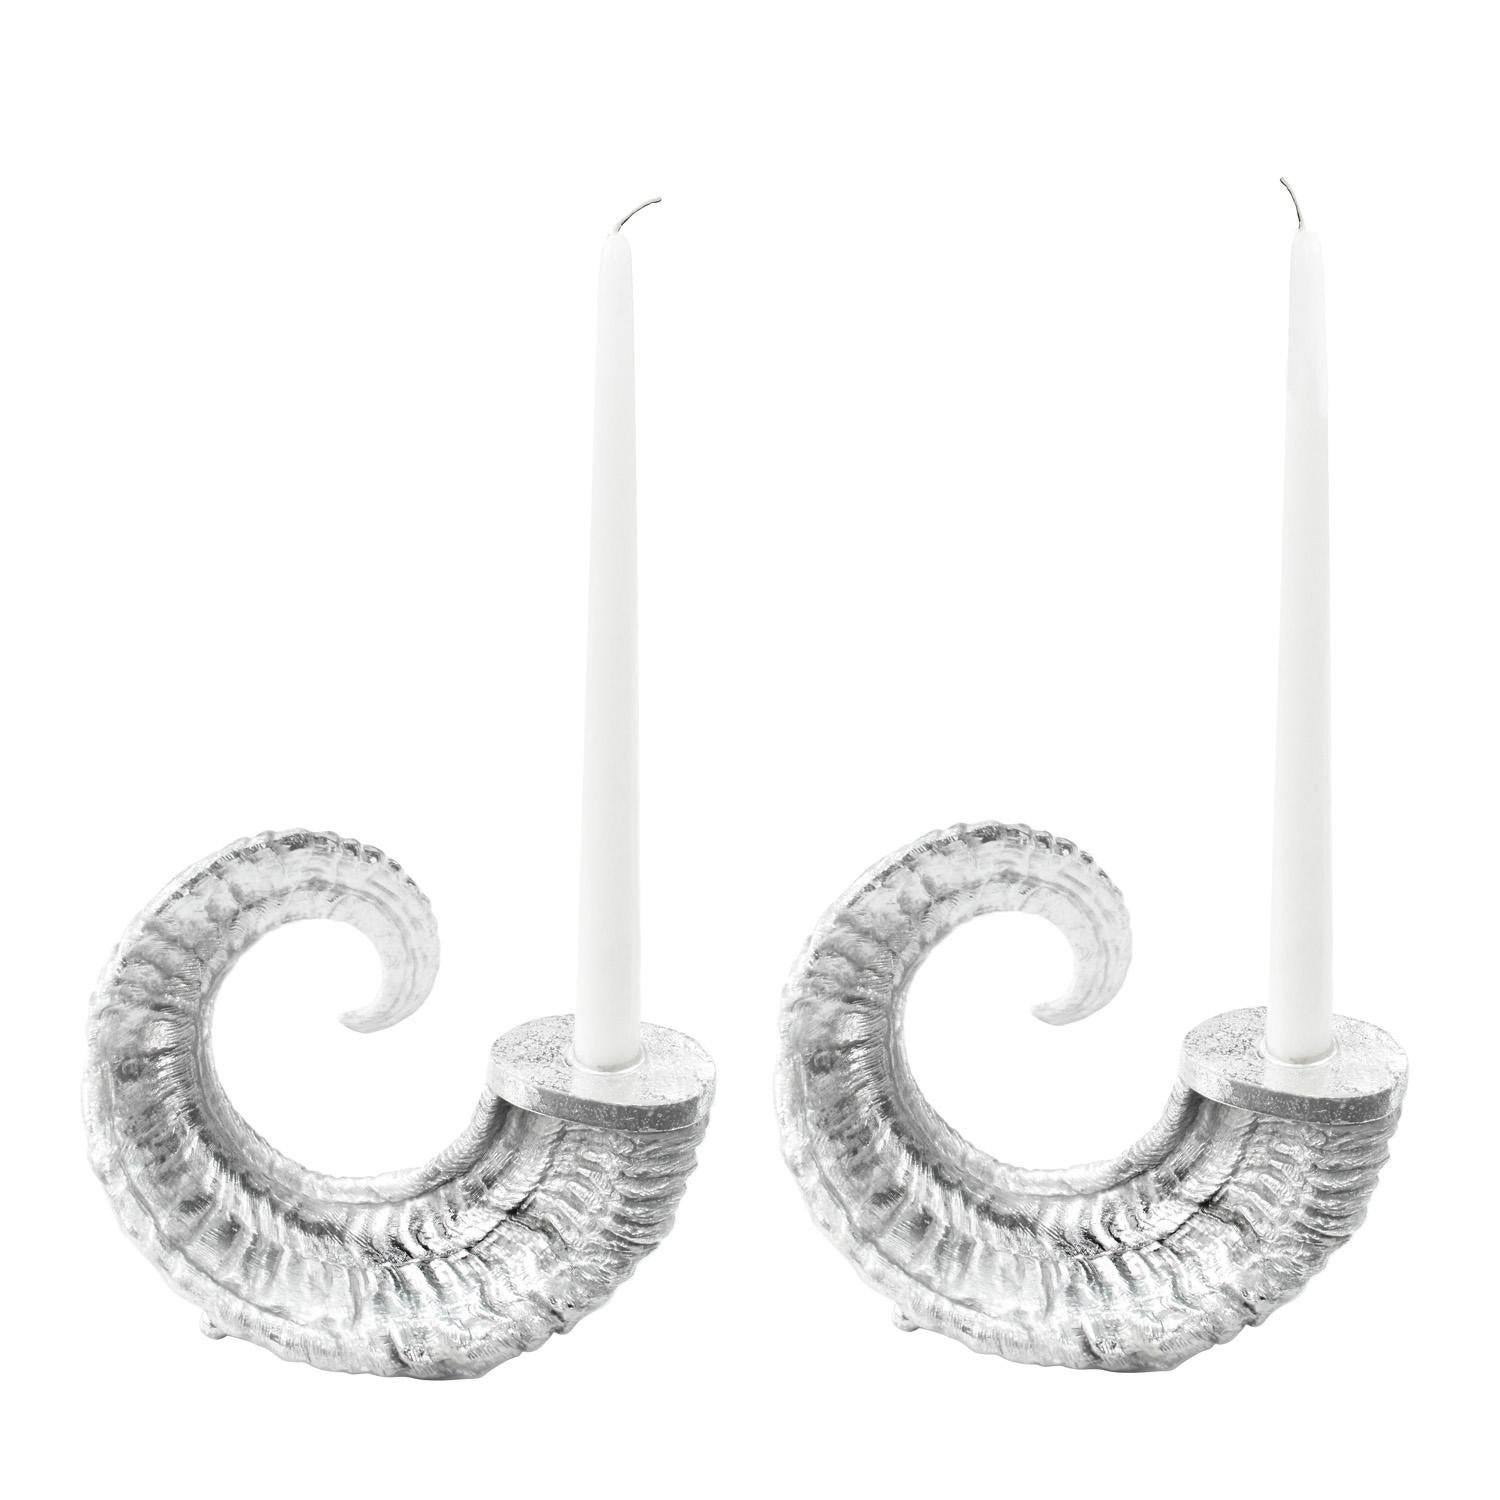 Pair of cast aluminum ram horn candlestick holders by Arthur Court, American 1970s. These are very stylish.